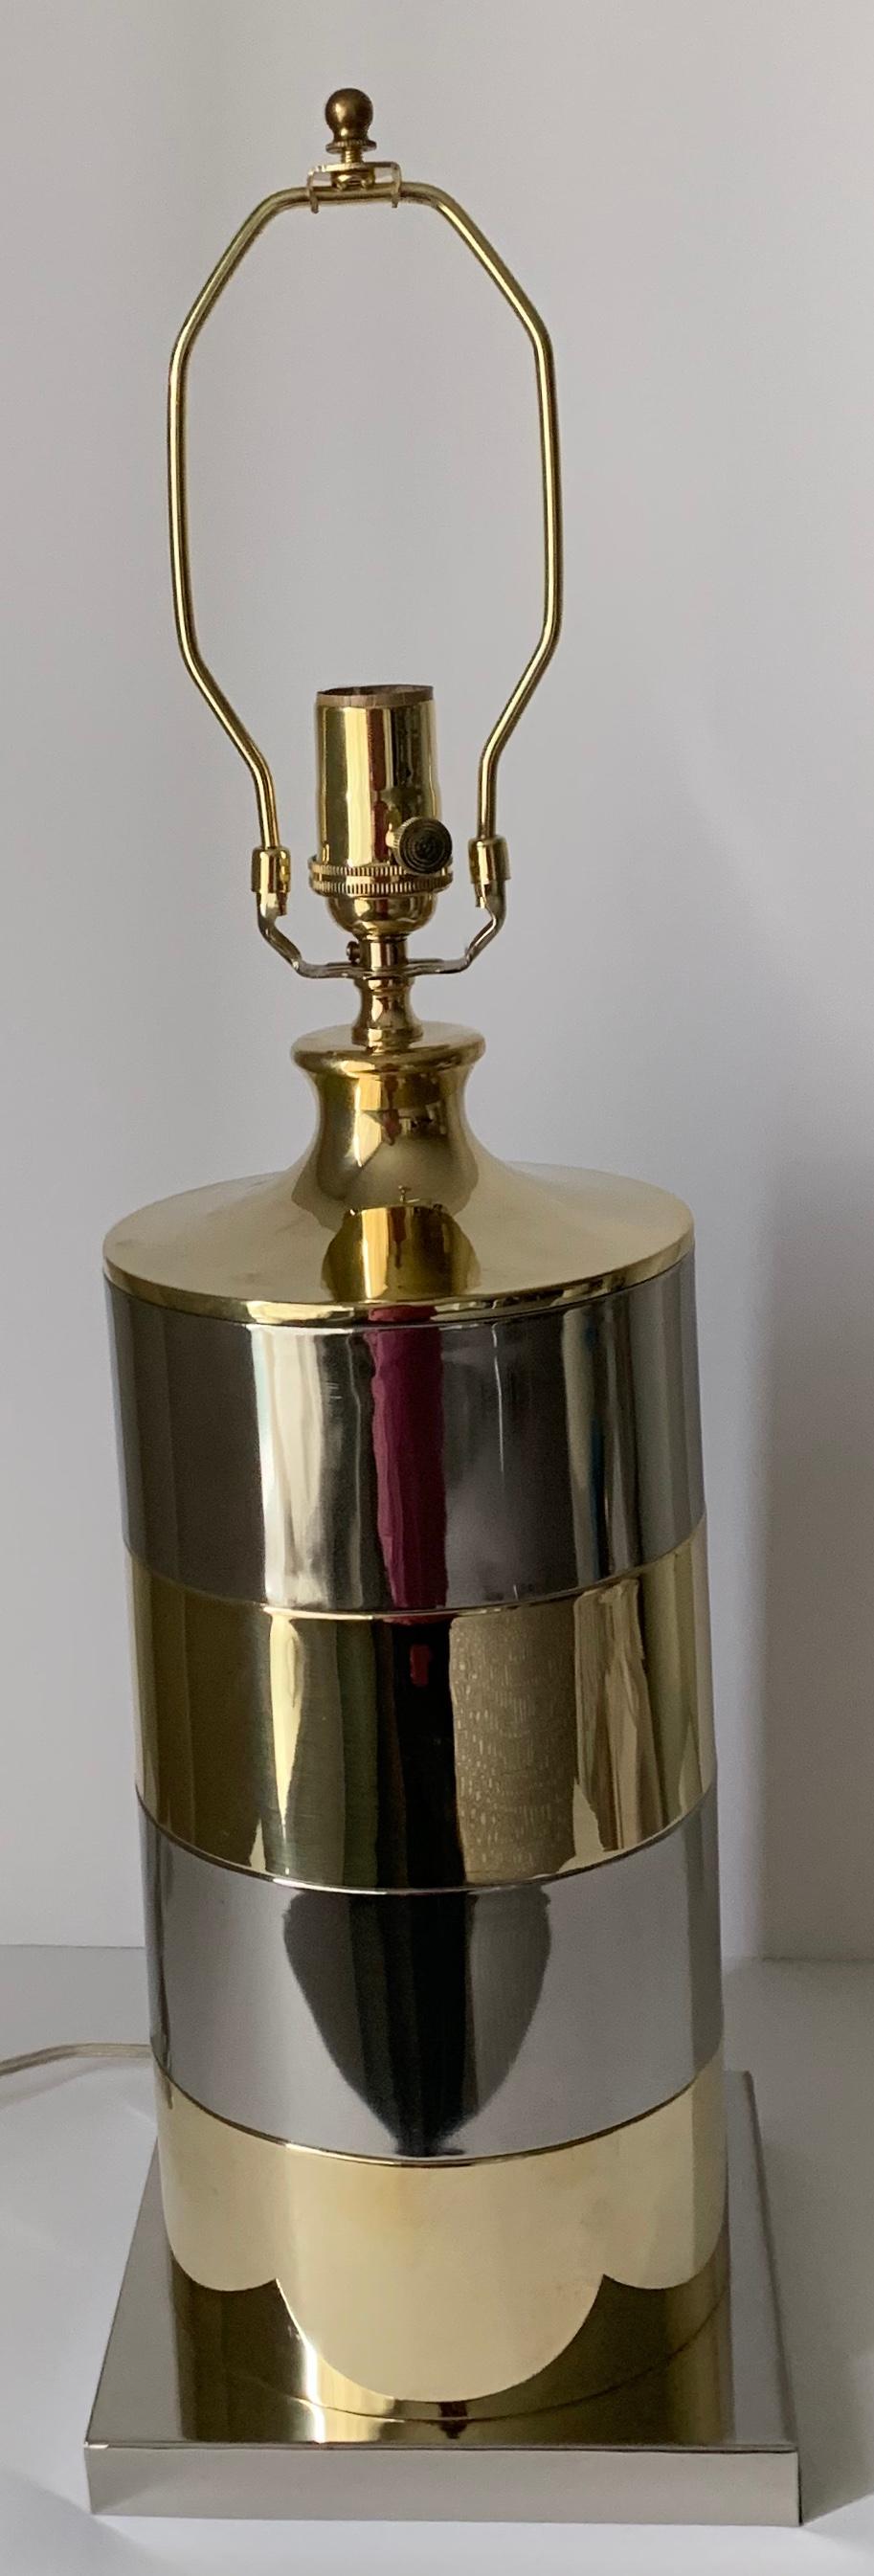 1970s Italian brass and chrome table lamp. Newly professionally polished to a high shine. Newly rewired. Takes one standard bulb. Ivory vellum paper lampshade or harp or finial are included. Lampshade measures Shade measures 12” diameter x 10” tall.